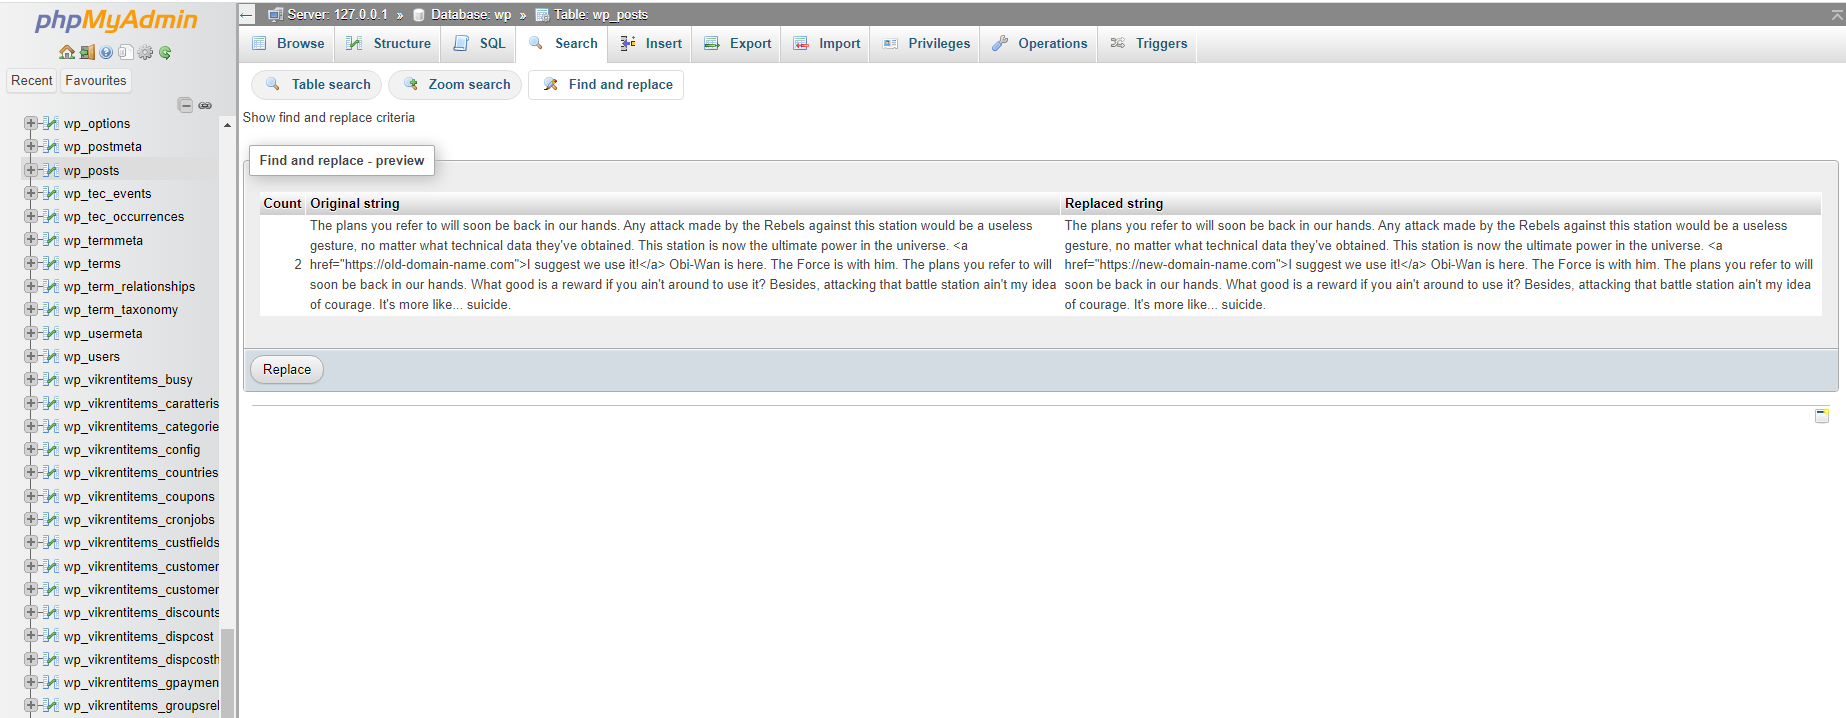 Screenshot showing a preview of all text instances to be replaced in the PHPMyAdmin panel.